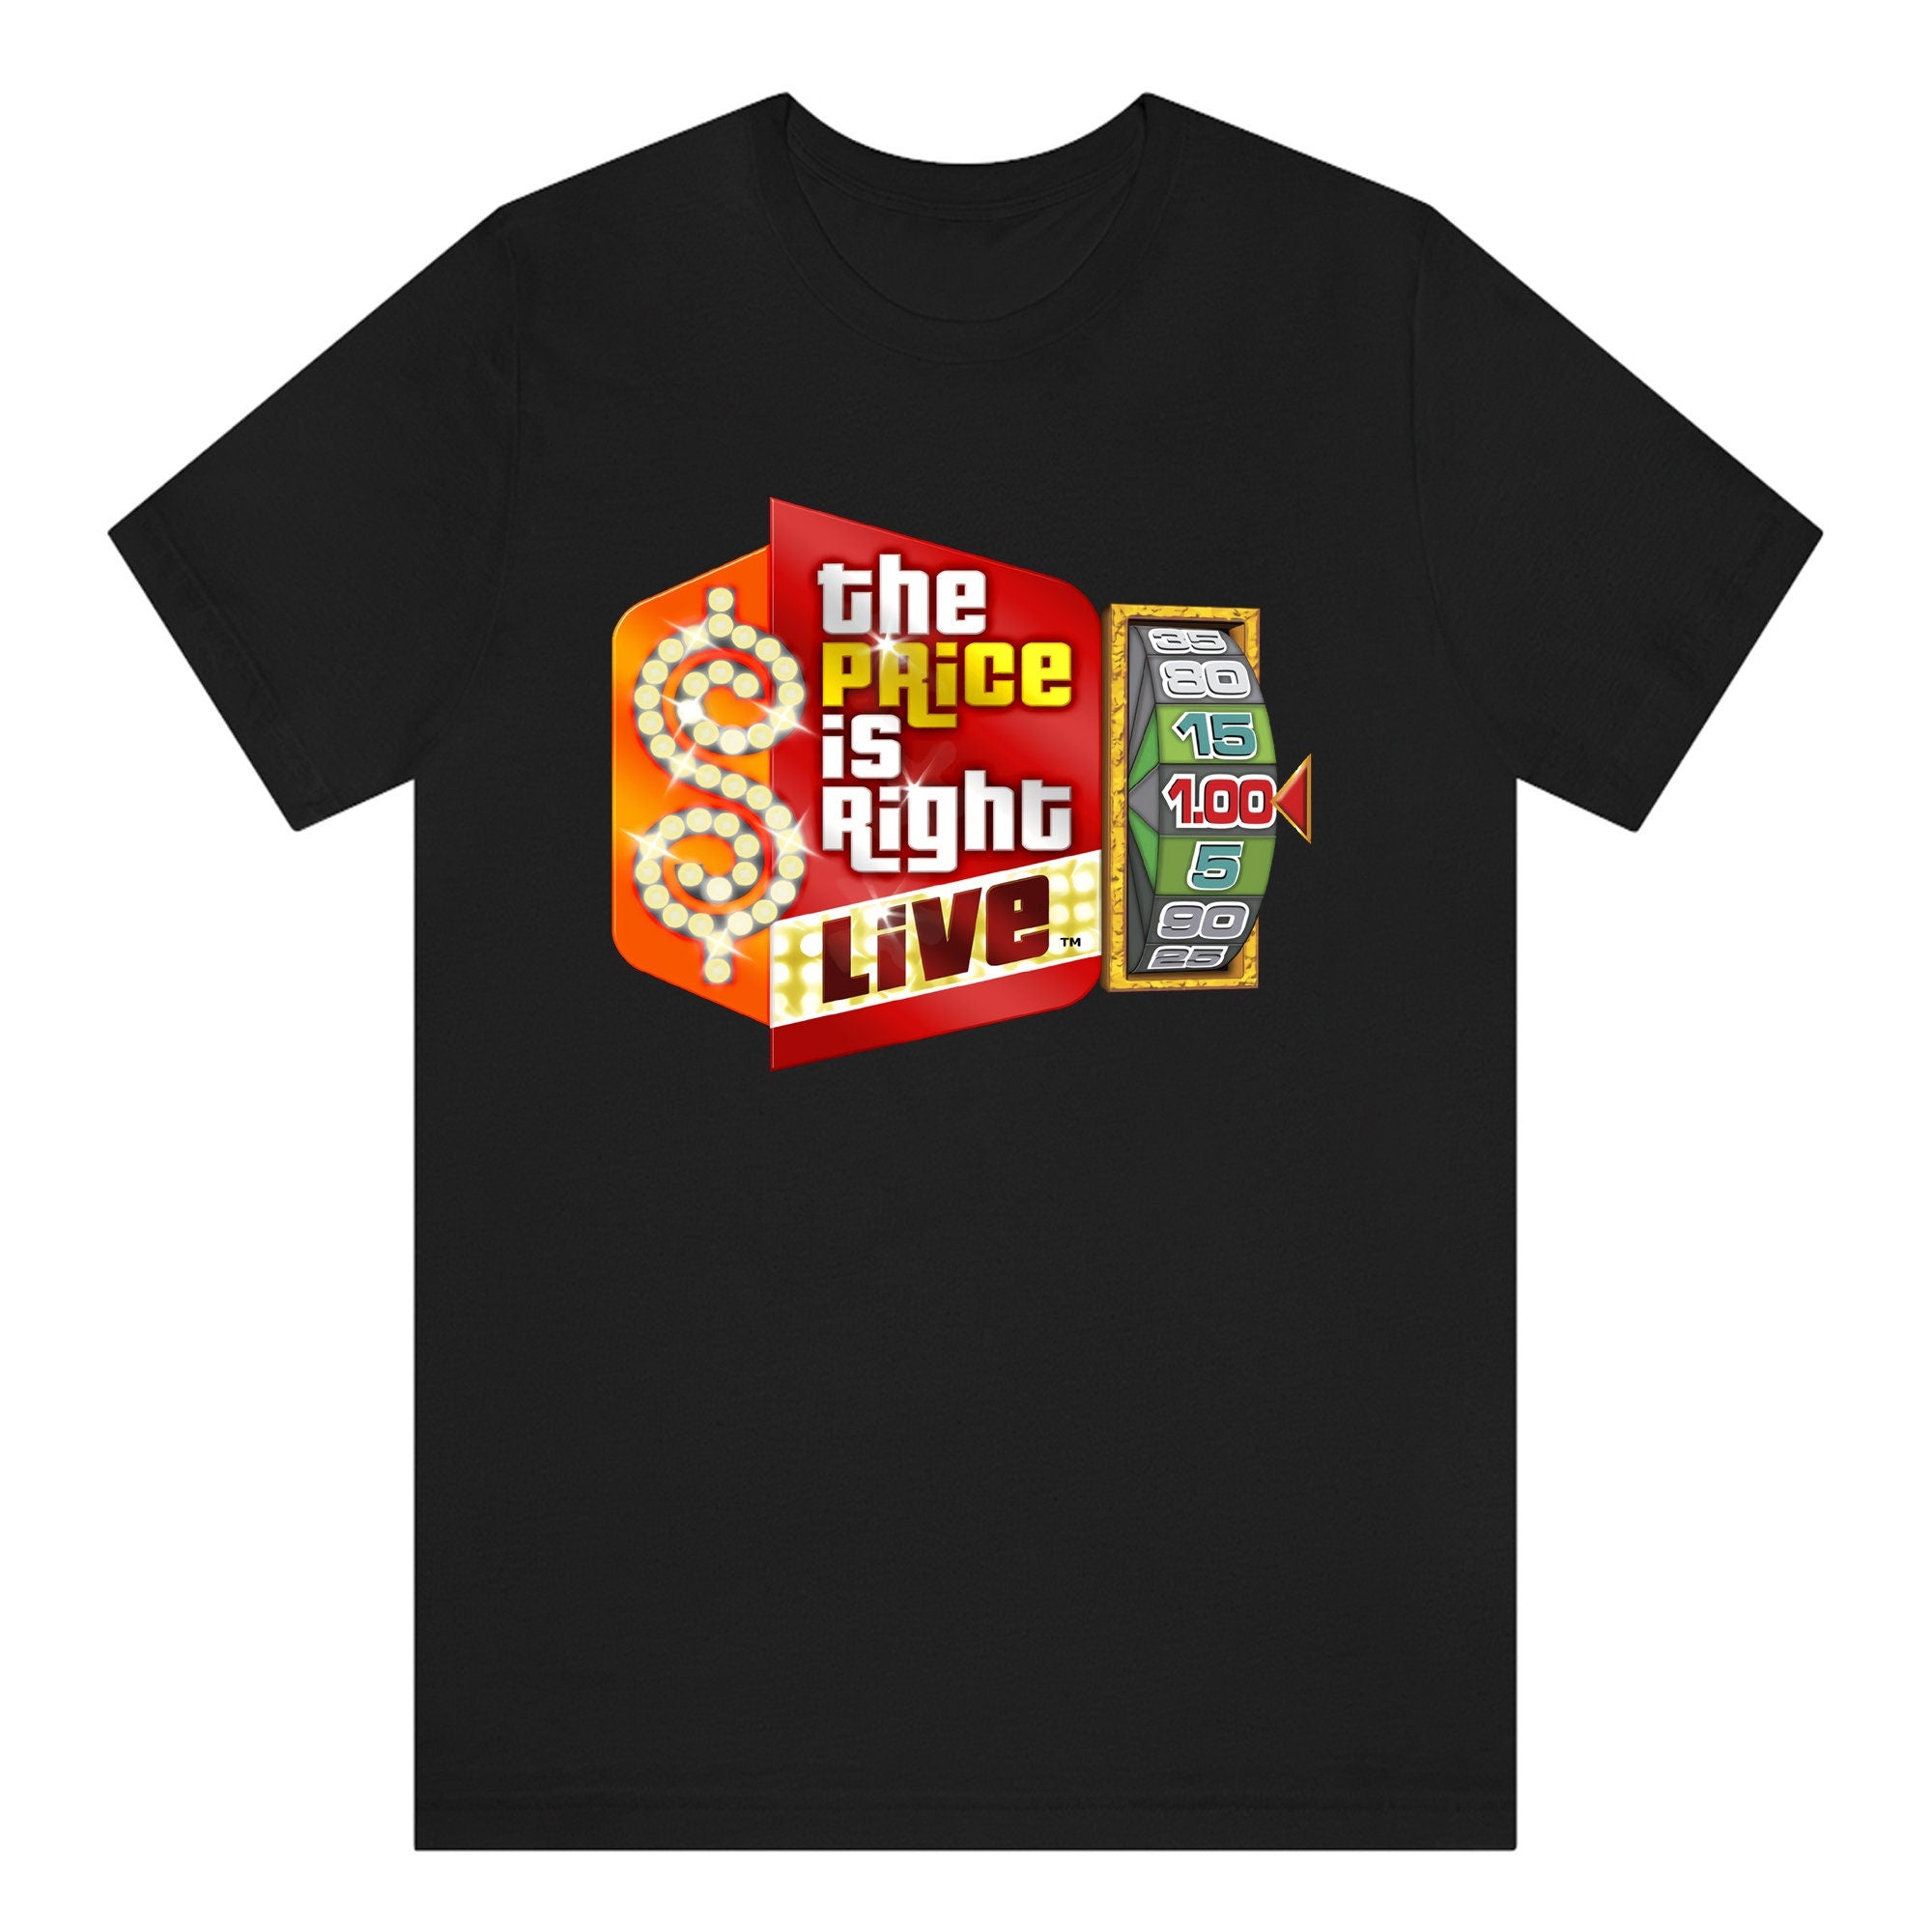 Creative And Fun 'The Price Is Right' Shirt Ideas